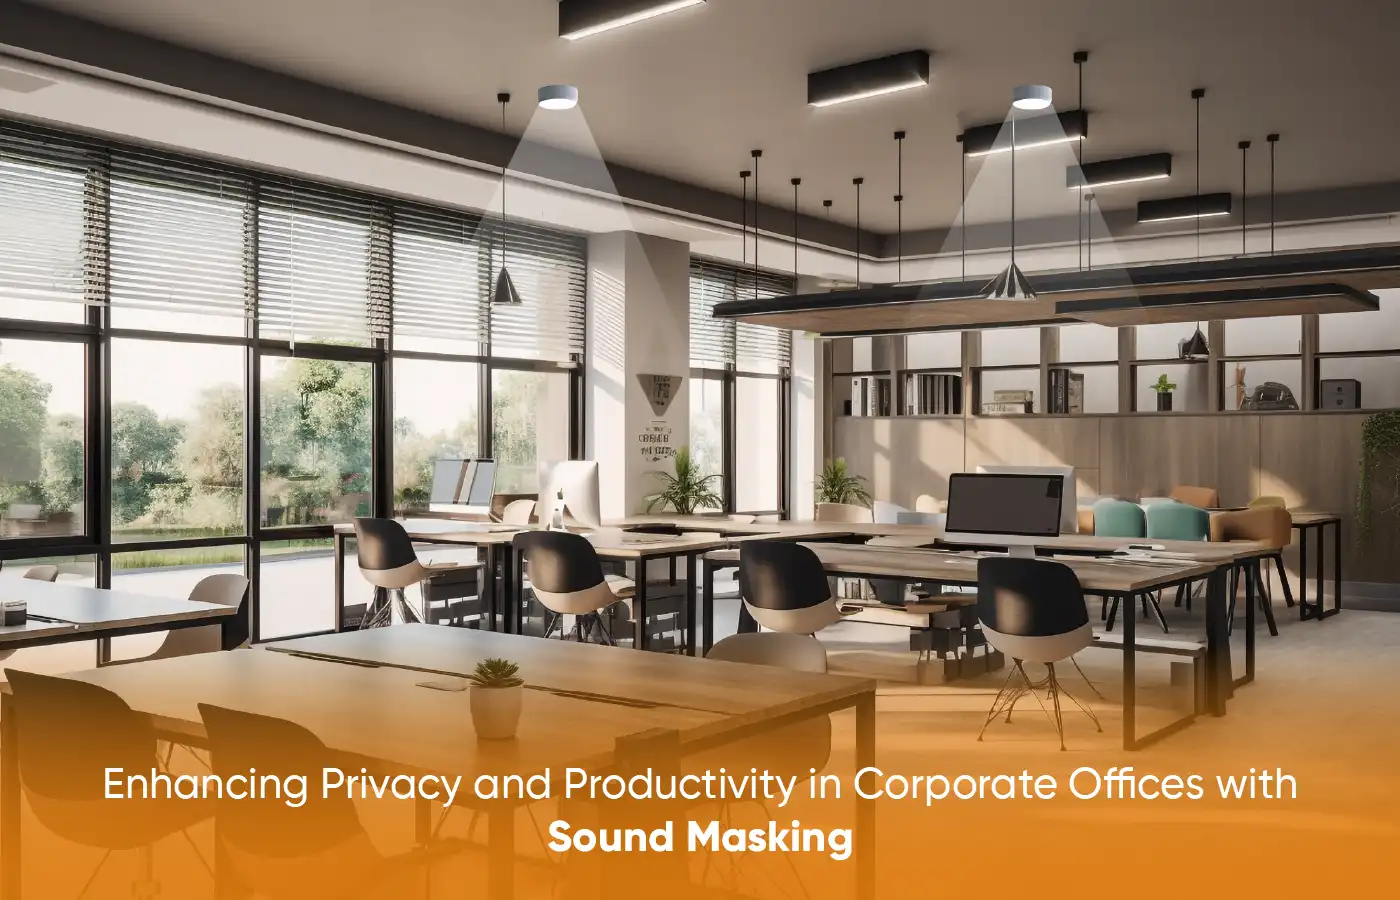 Sound Masking Systems - Enhancing Privacy and Productivity in Corporate Offices with Sound Masking